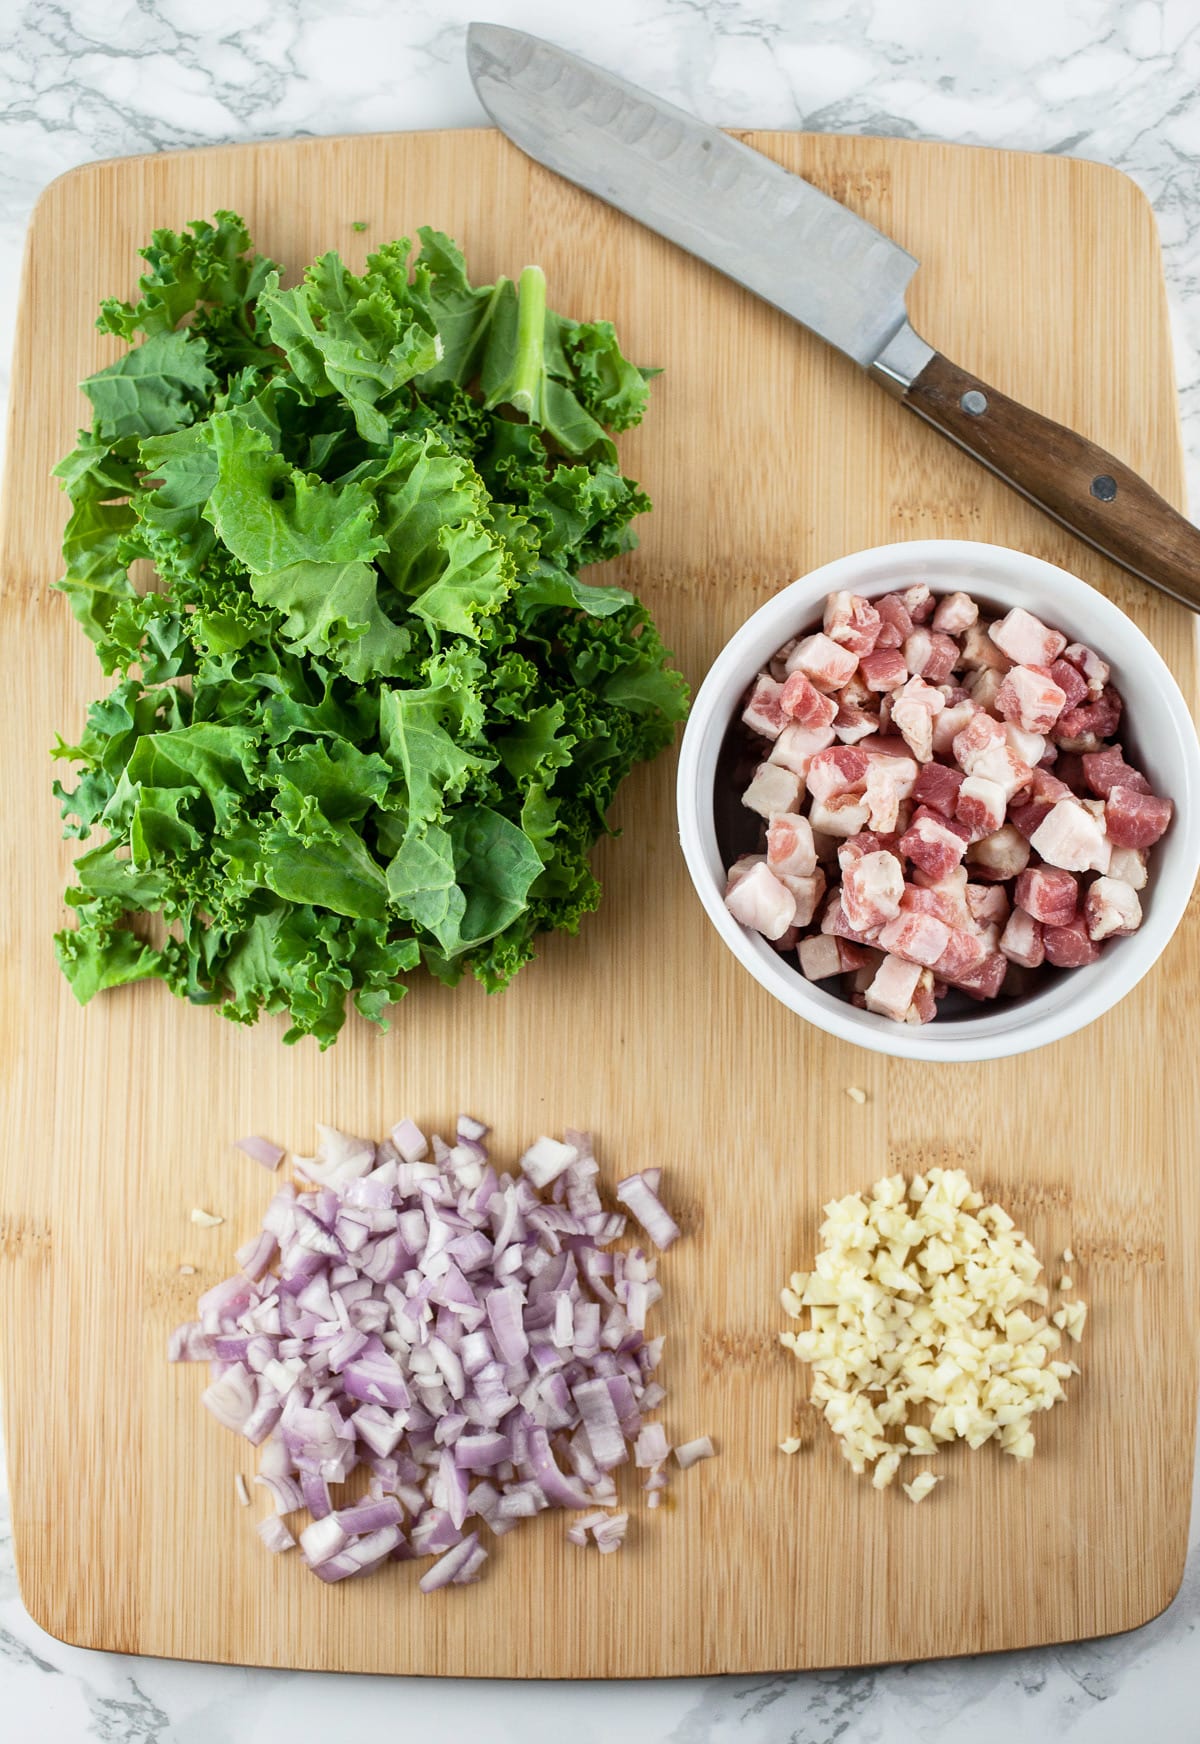 Minced garlic, shallots, chopped kale, and pancetta on wooden cutting board with knife.